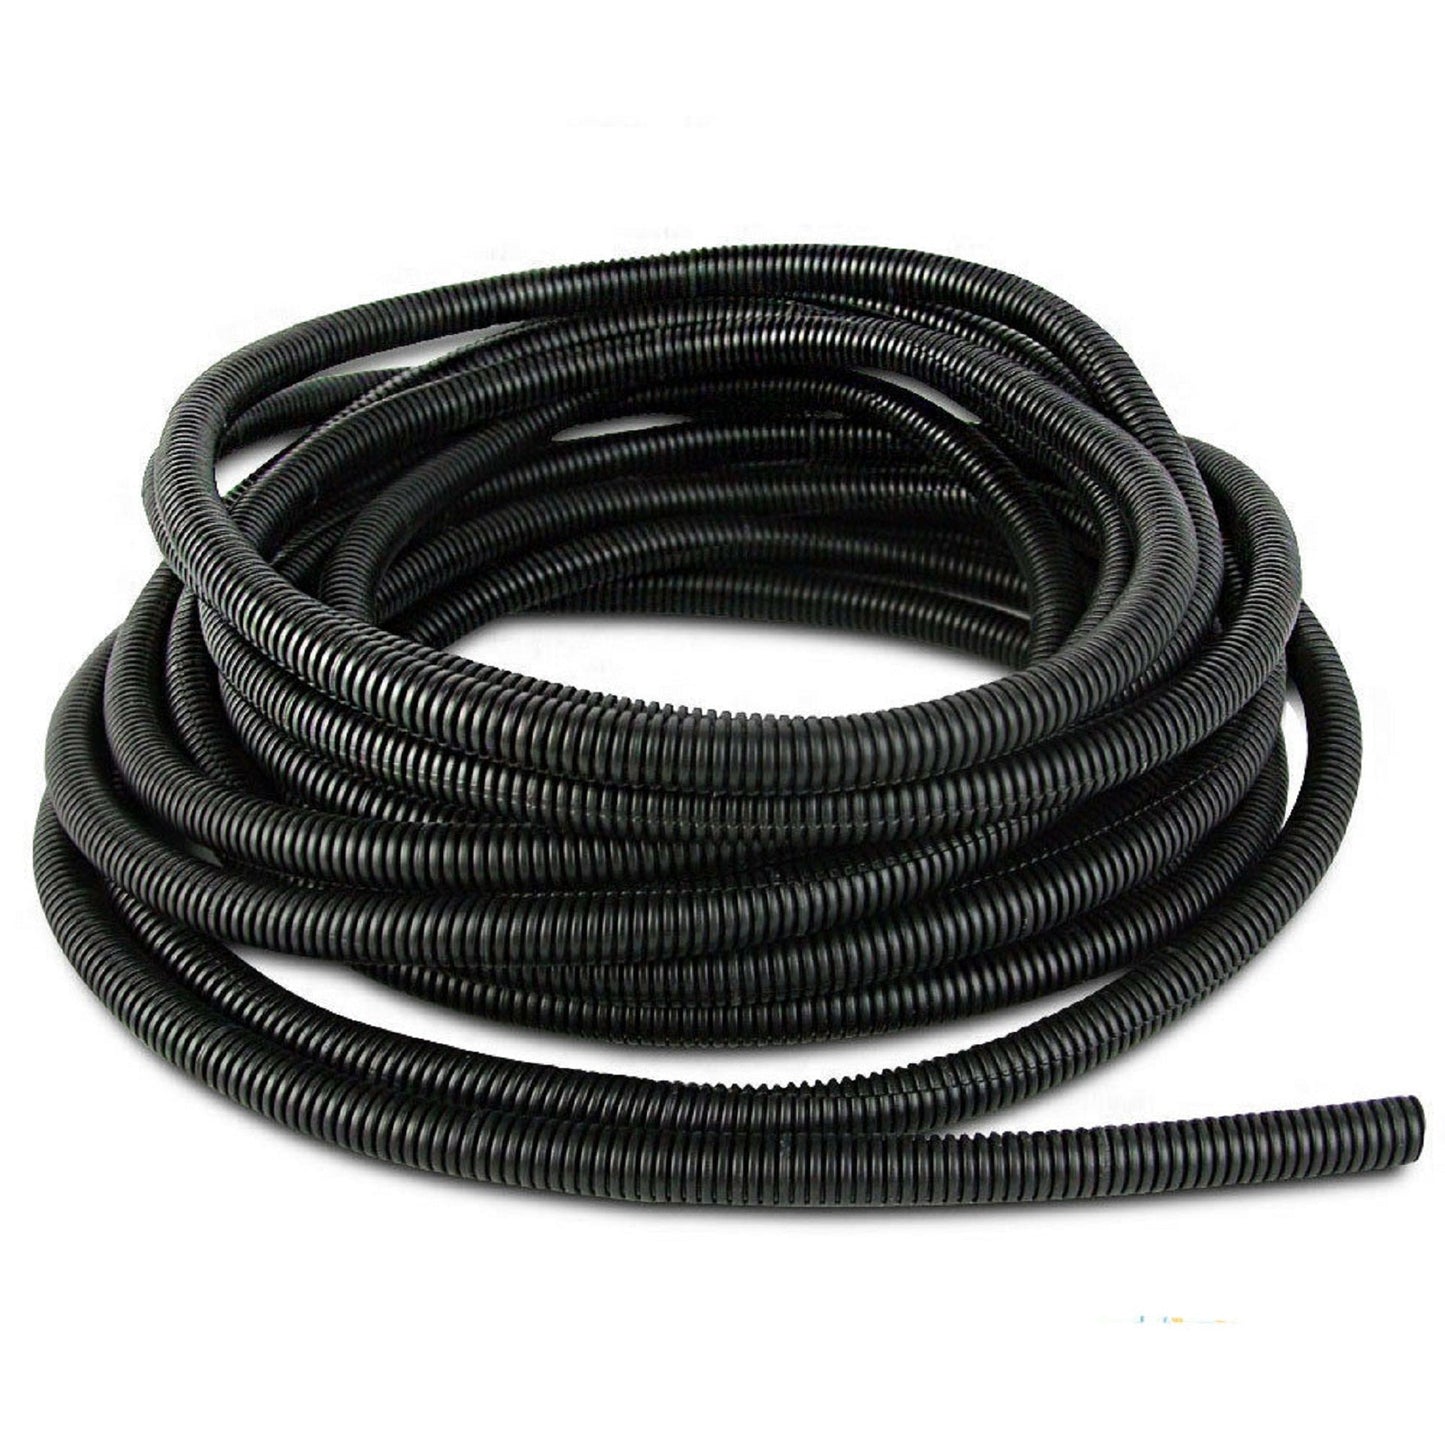 findmall Conduit Corrugated Wire Loom Flex Cable Choose Hot Sizes Black Plastic Tube (20ft-3/4") FINDMALLPARTS